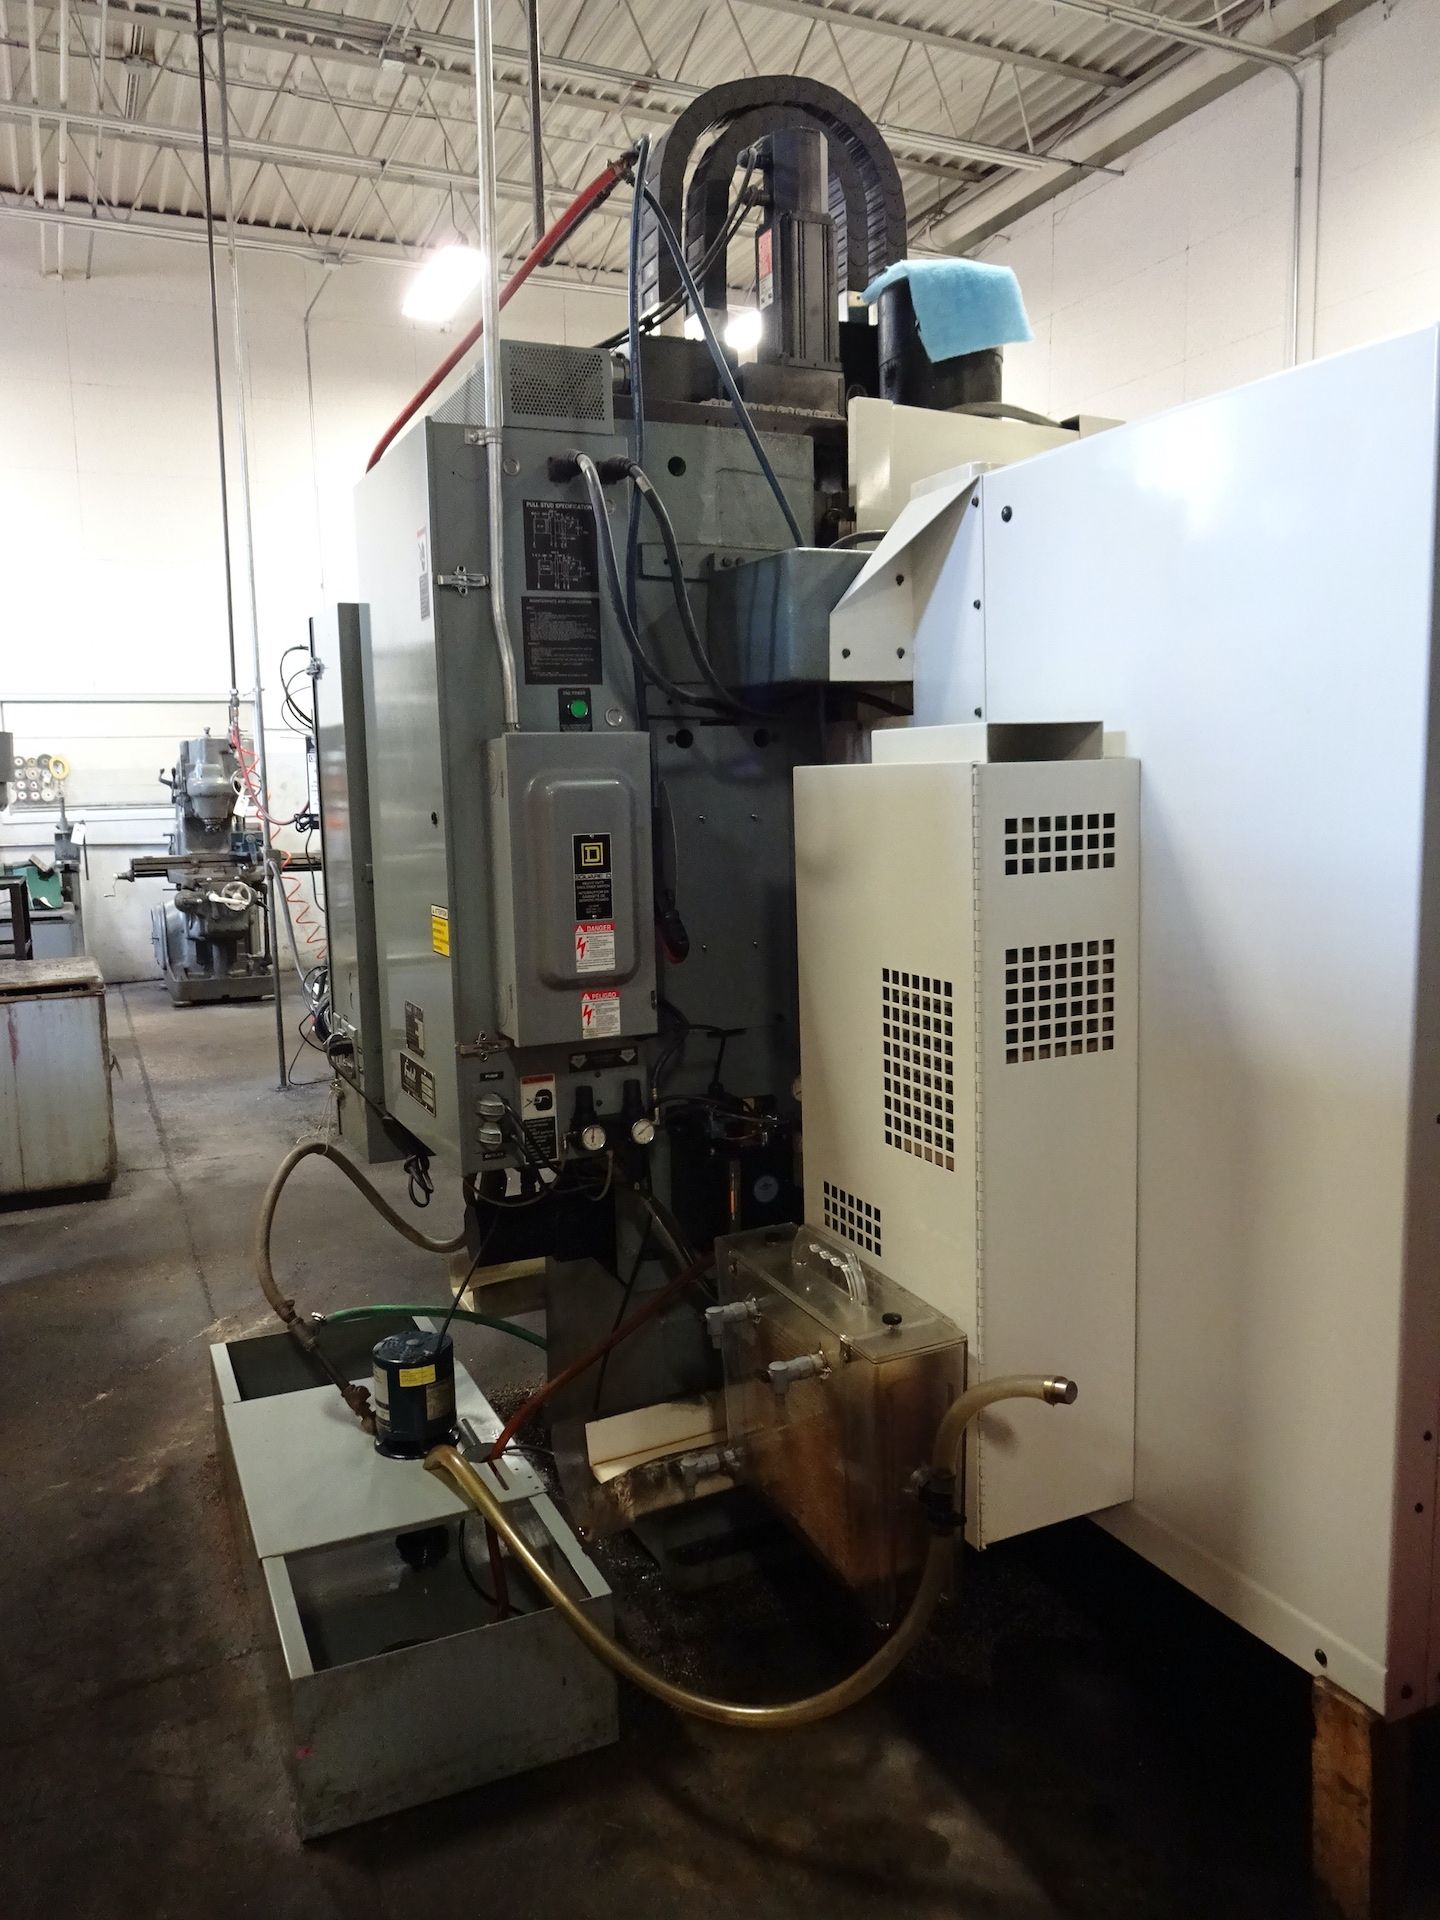 Fadal Model VMC5020A CNC Vertical Machining Center, S/N 9810947 (1998), 7500 RPM Spindle, 21 Station - Image 23 of 24